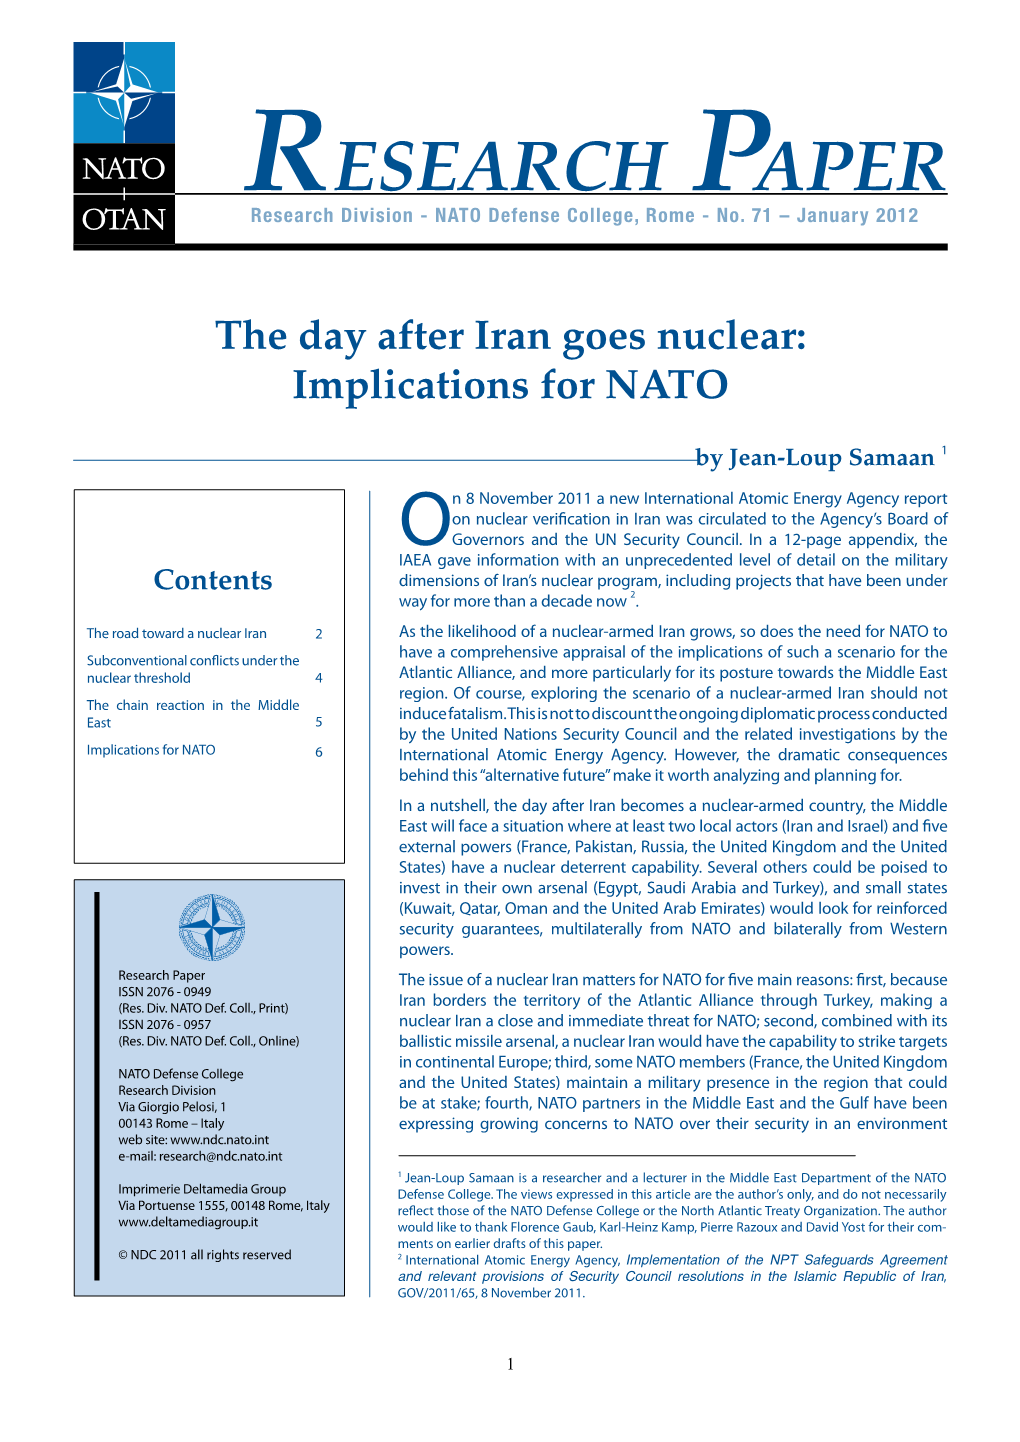 The Day After Iran Goes Nuclear: Implications for NATO